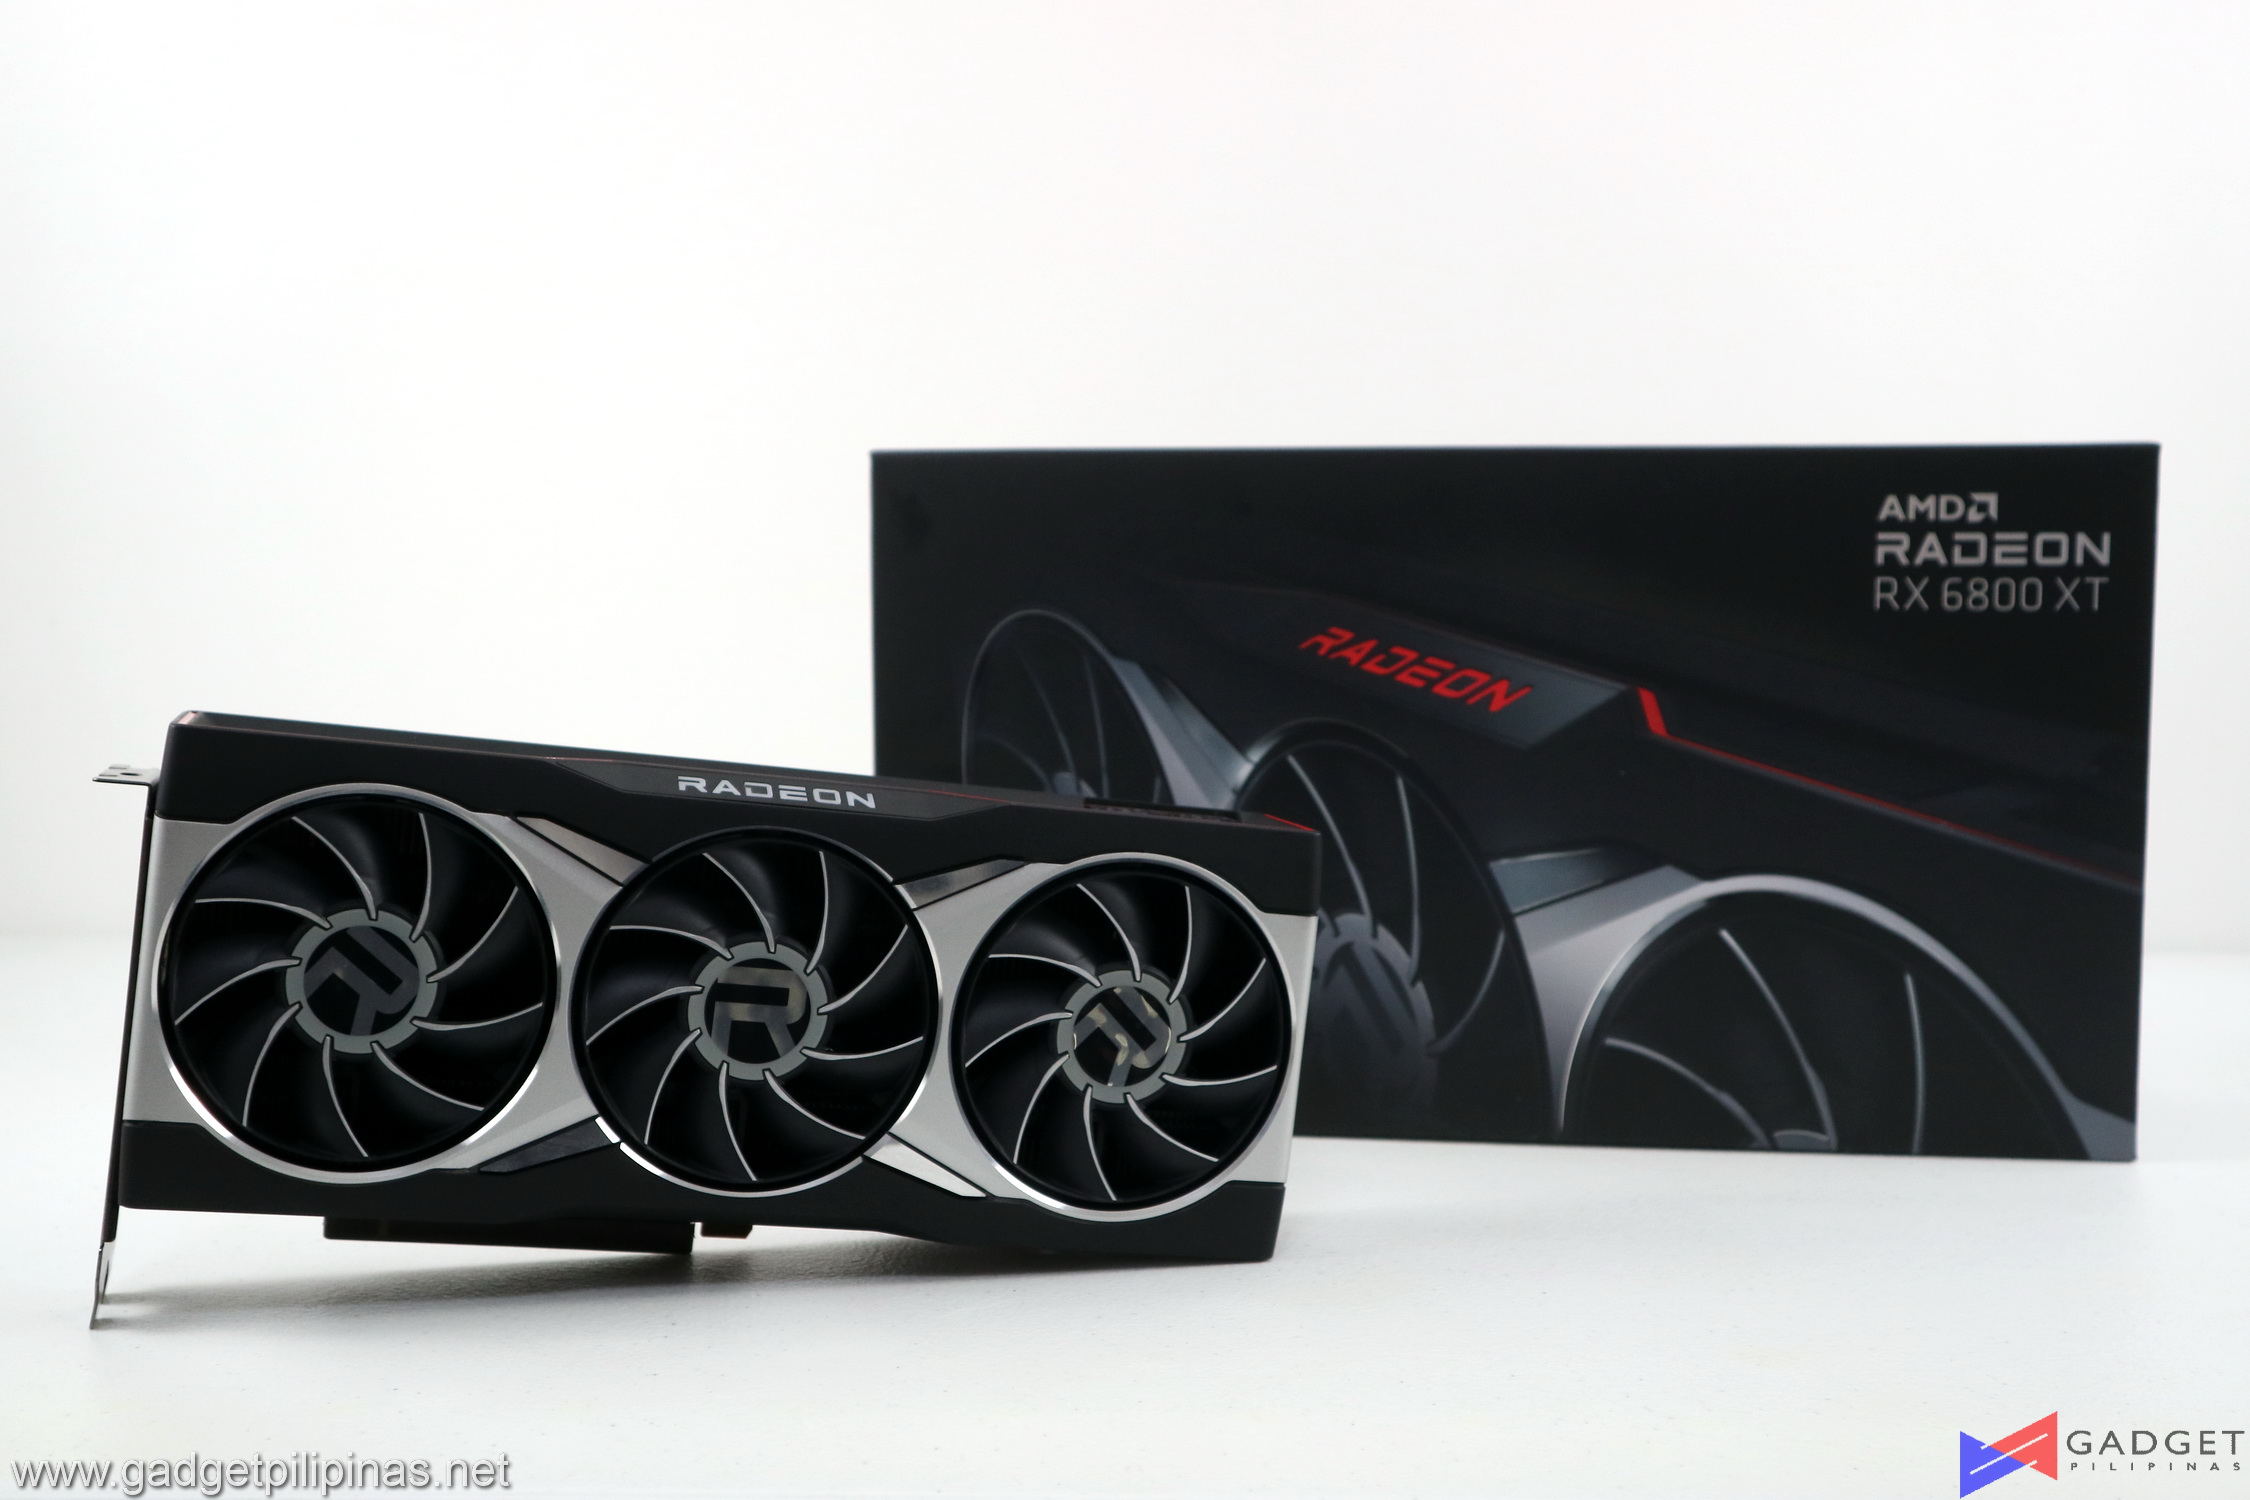 AMD Radeon RX 6800 XT Unboxing, Overview, and PH Price Estimate